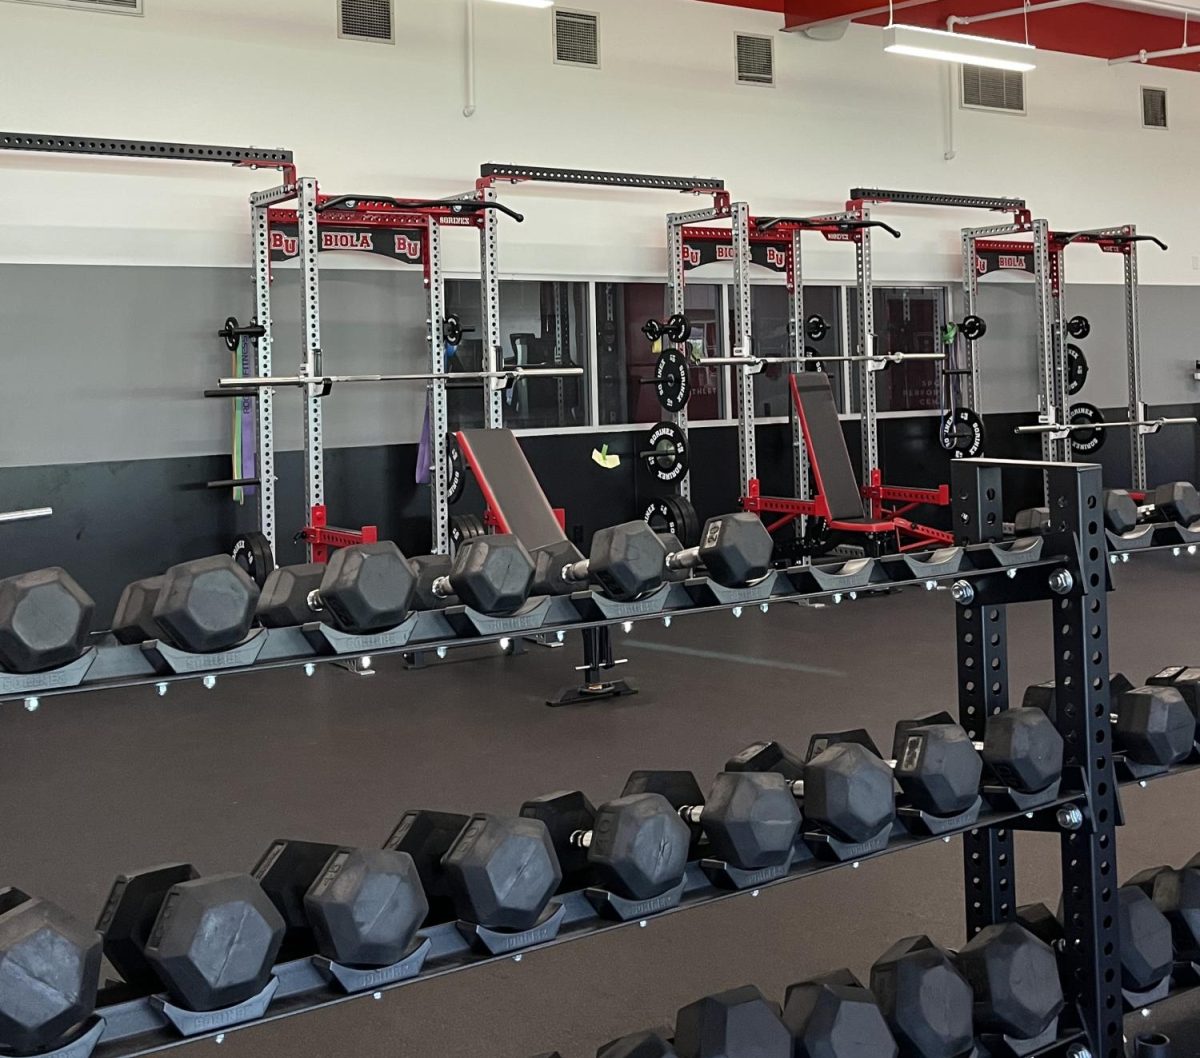 Biolas+fitness+center+gets+new+equipment+and+renovations.